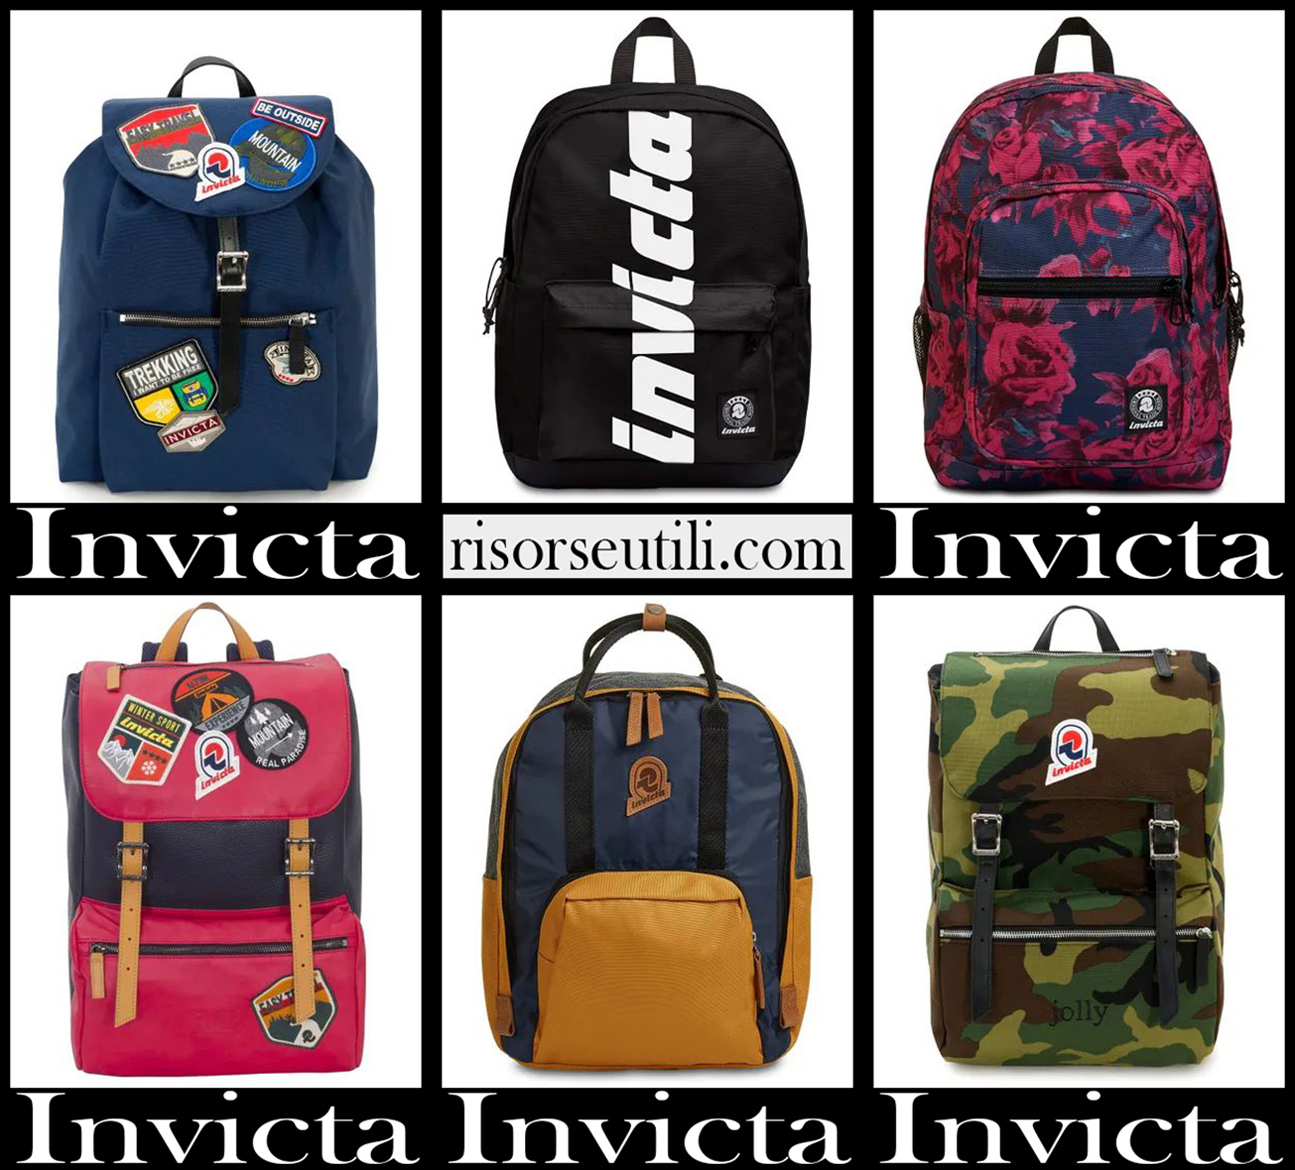 New arrivals Invicta backpacks 2021 2022 school free time